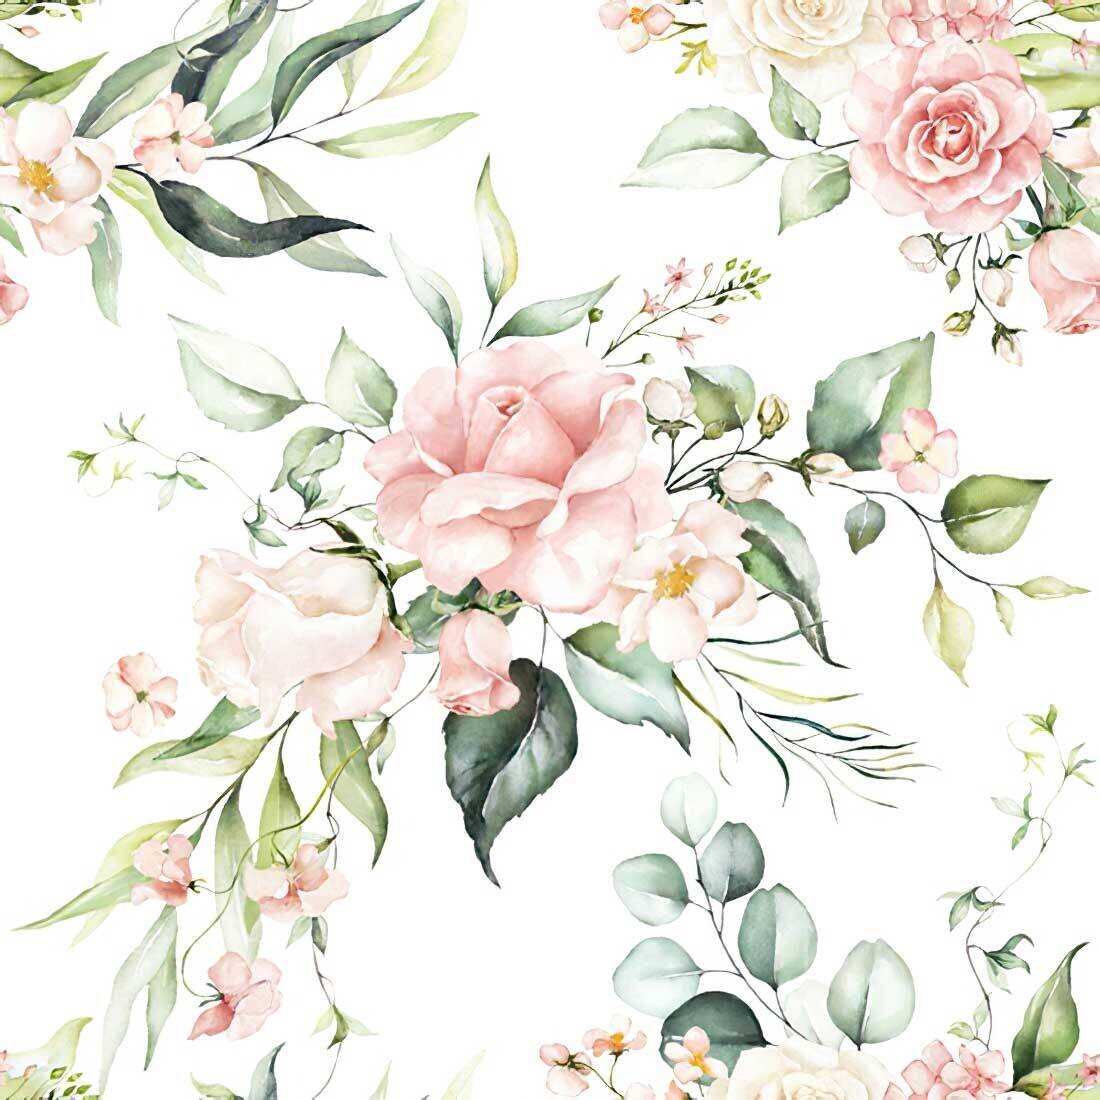 Decoupage Paper Napkins - Floral - Blush Pink Bouquet (1 Sheet) Out of Stock